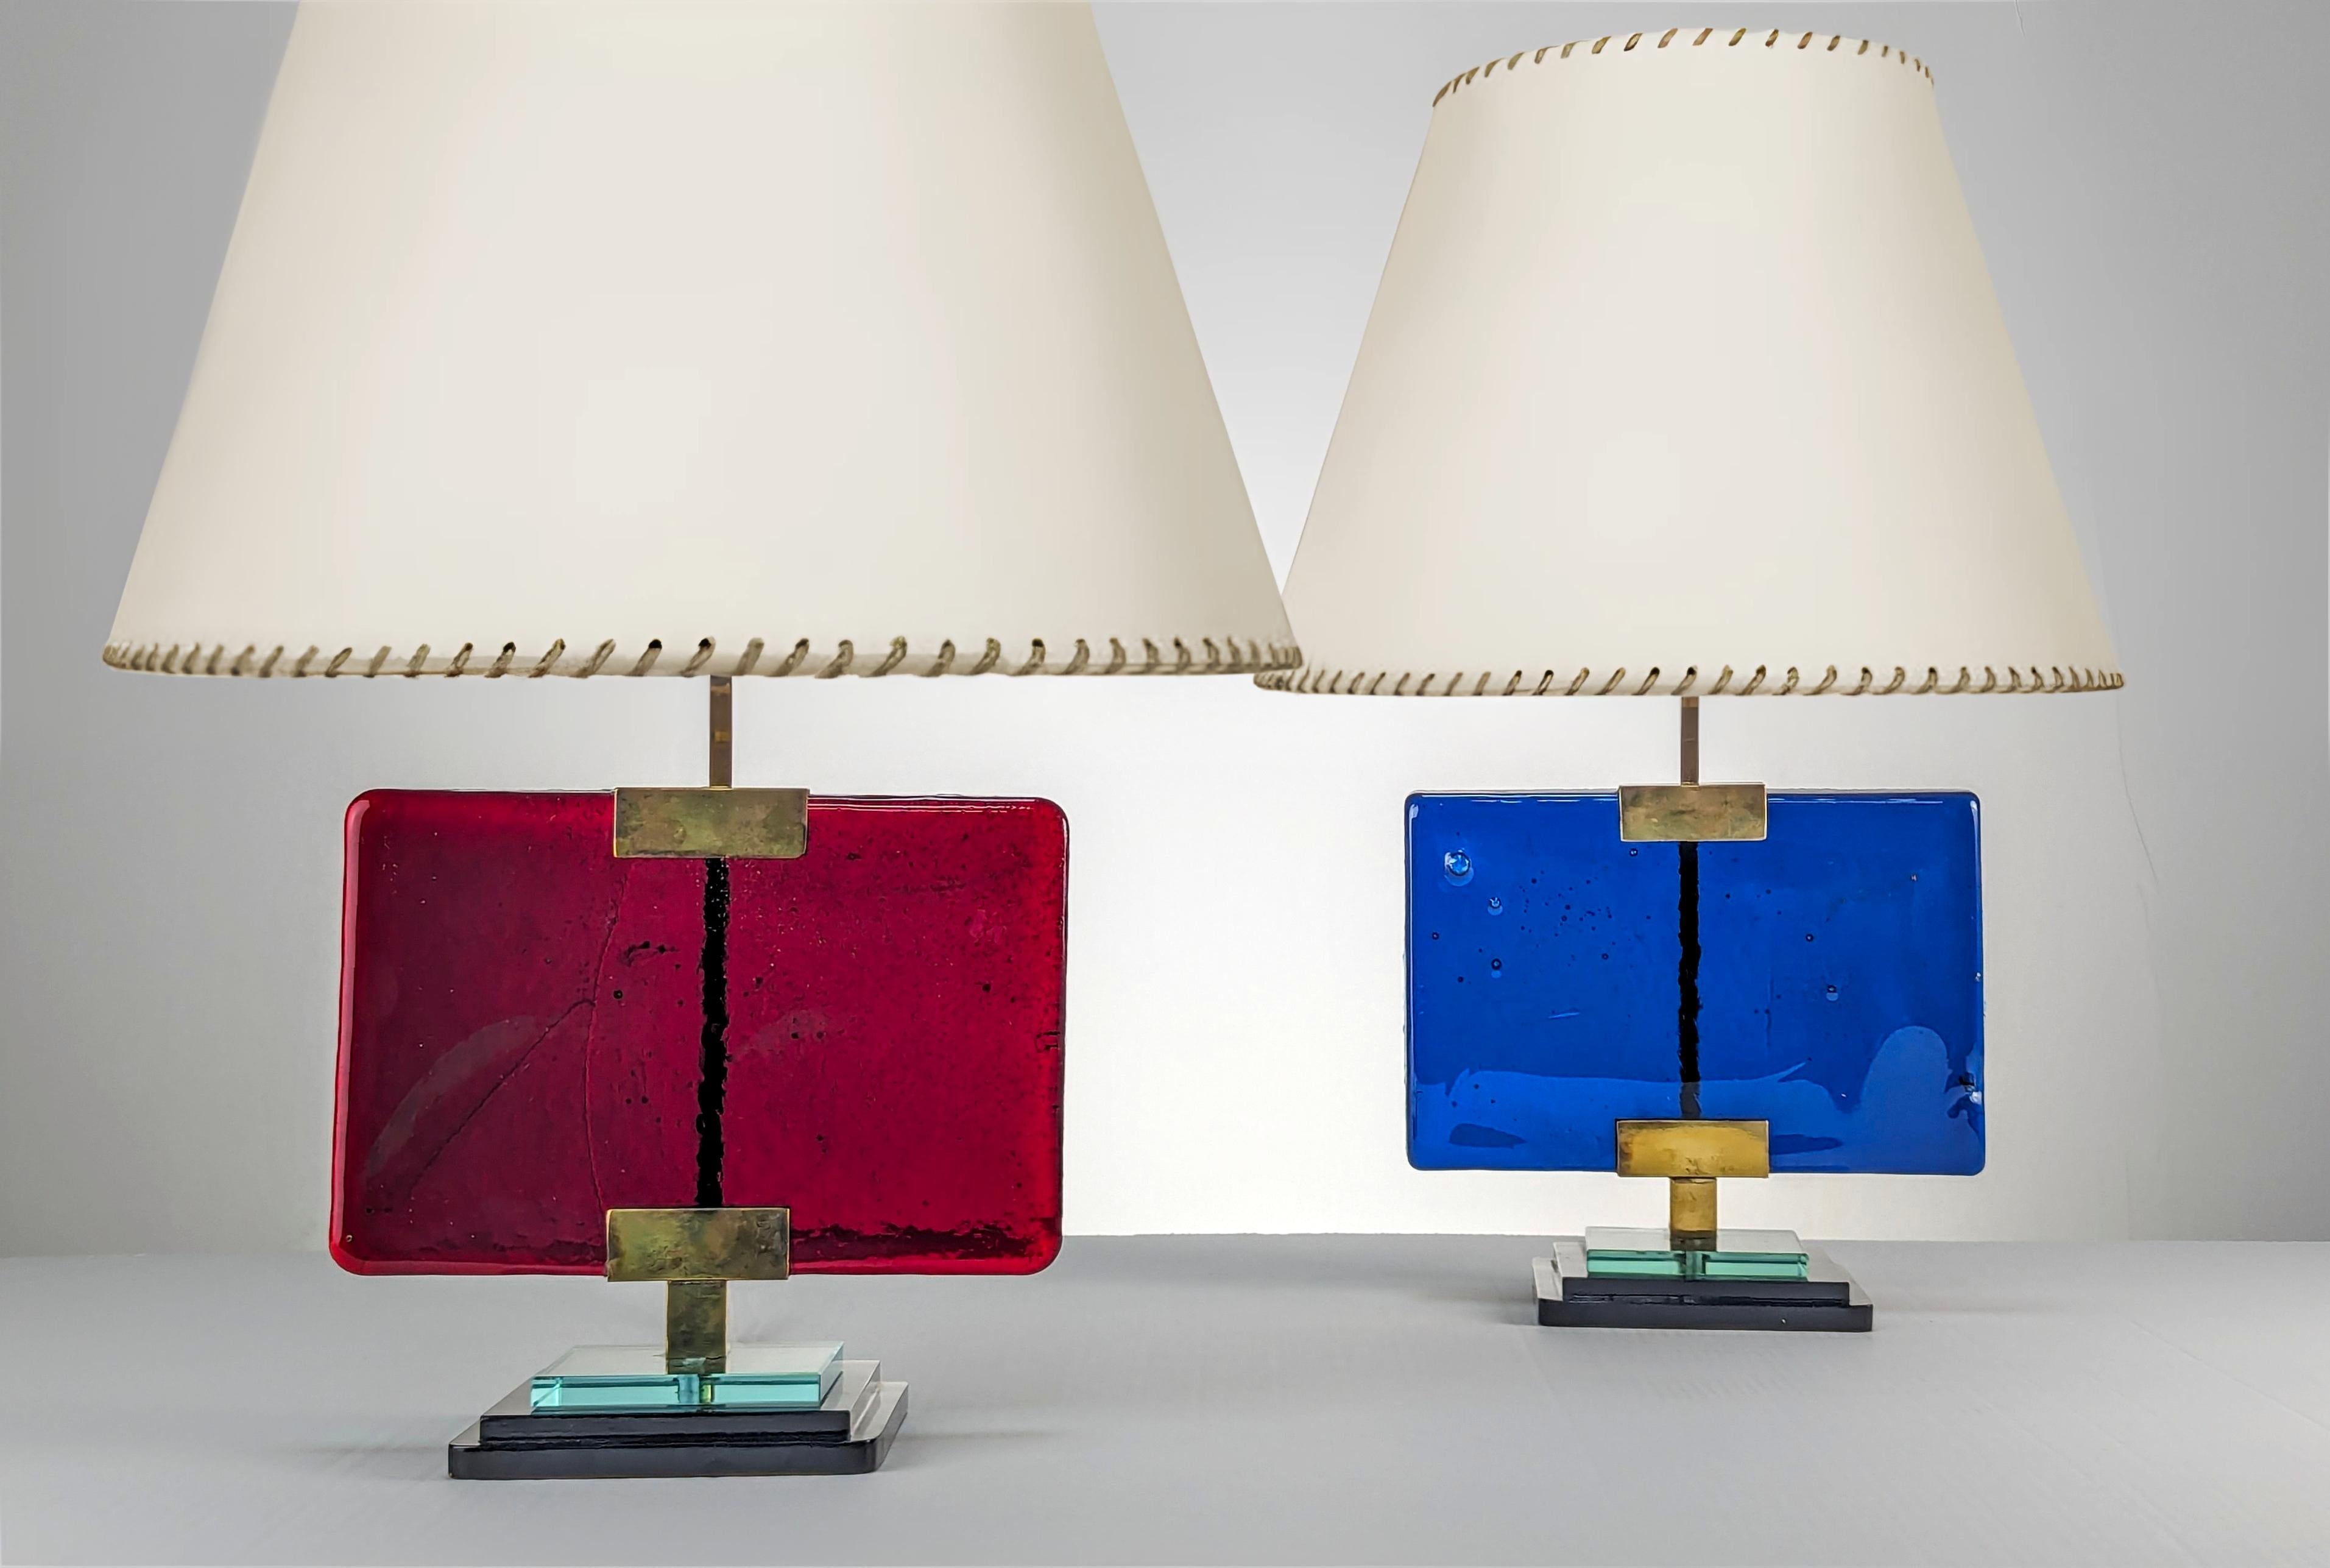 Amazing pair of table lamps crafted in brass and beautiful red and blue colored glass, attributed to the designs of Pietro Chiesa for Fontana Arte, as shown by a pair of documented floor lamps on page 202 of the lighting bible '1000 Lights' by